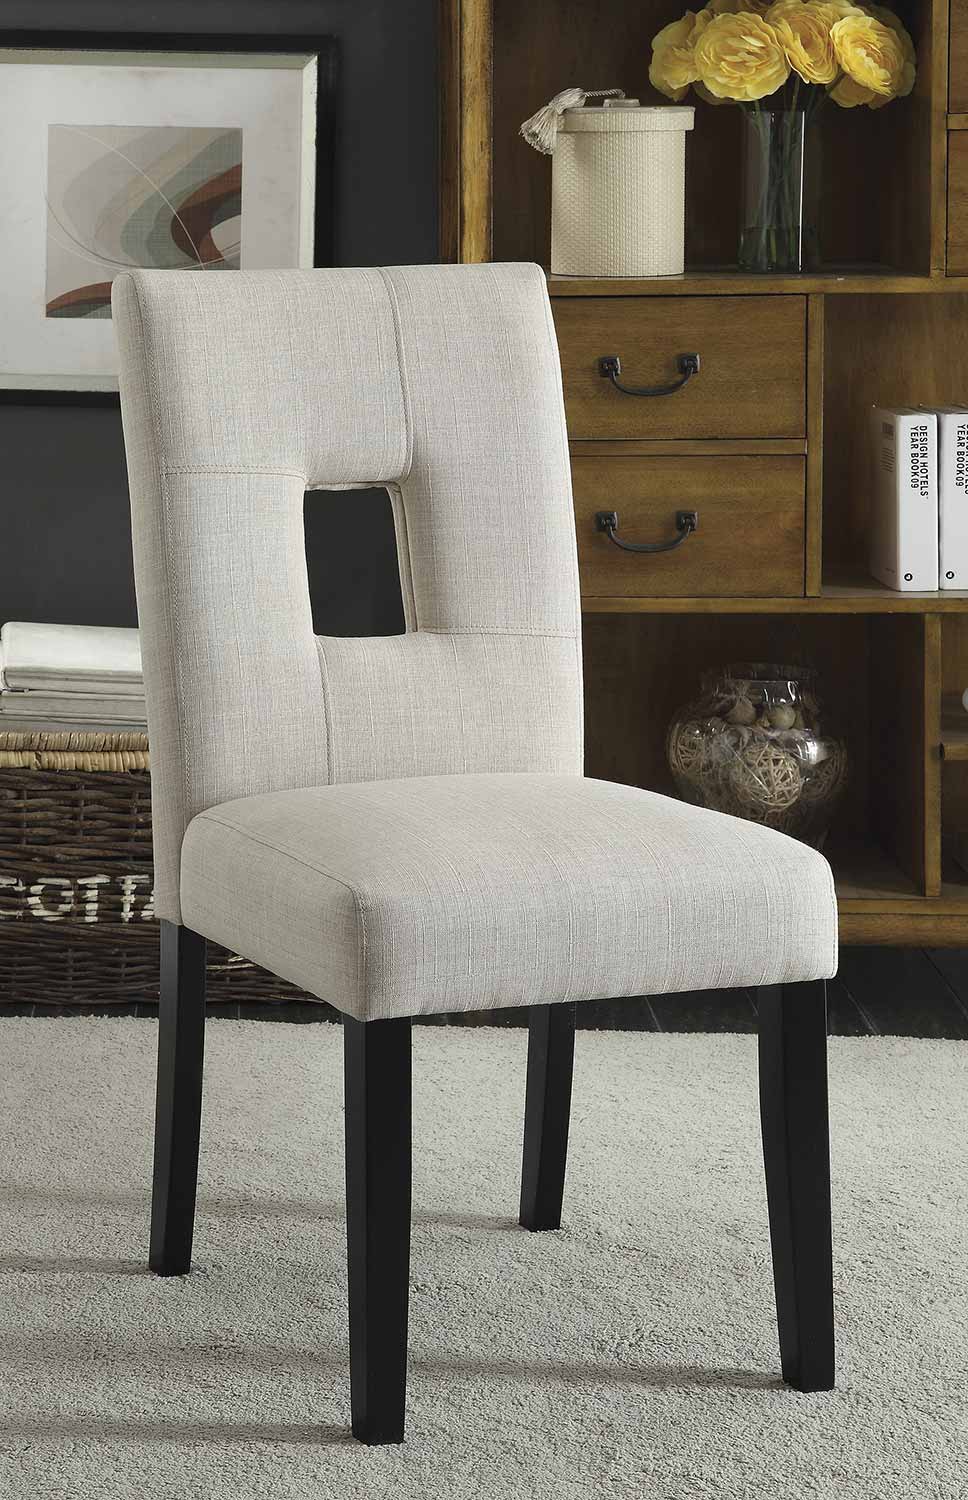 Coaster Andenne Dining Chair - Beige/Black